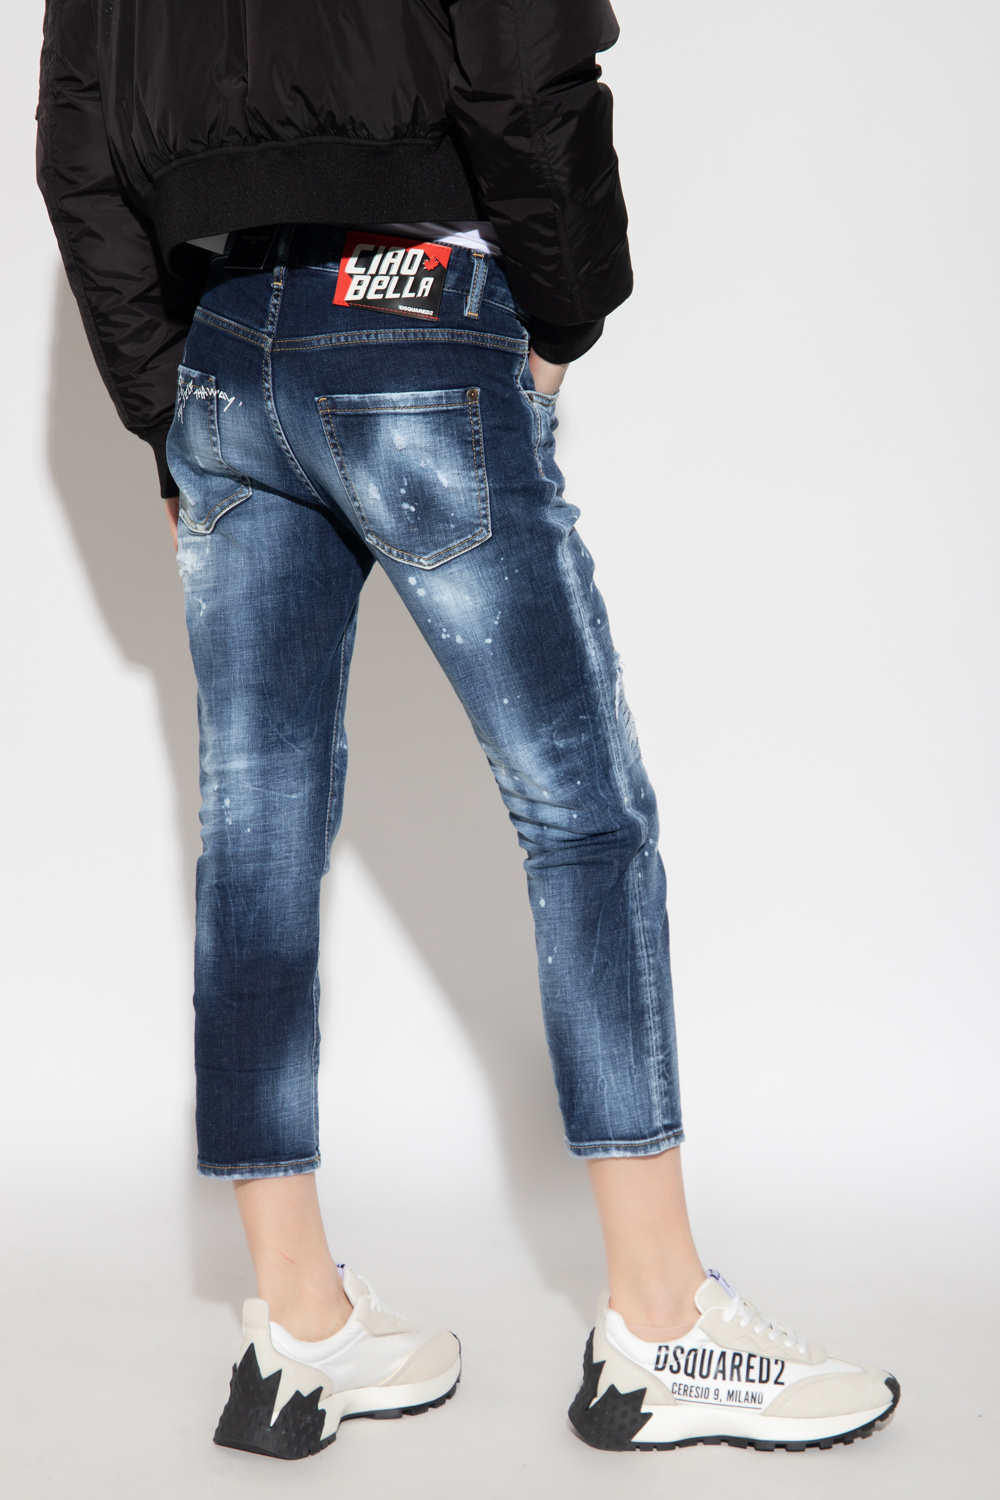 Dsquared2 'Cool Girl Cropped' jeans | Women's Clothing | Vitkac